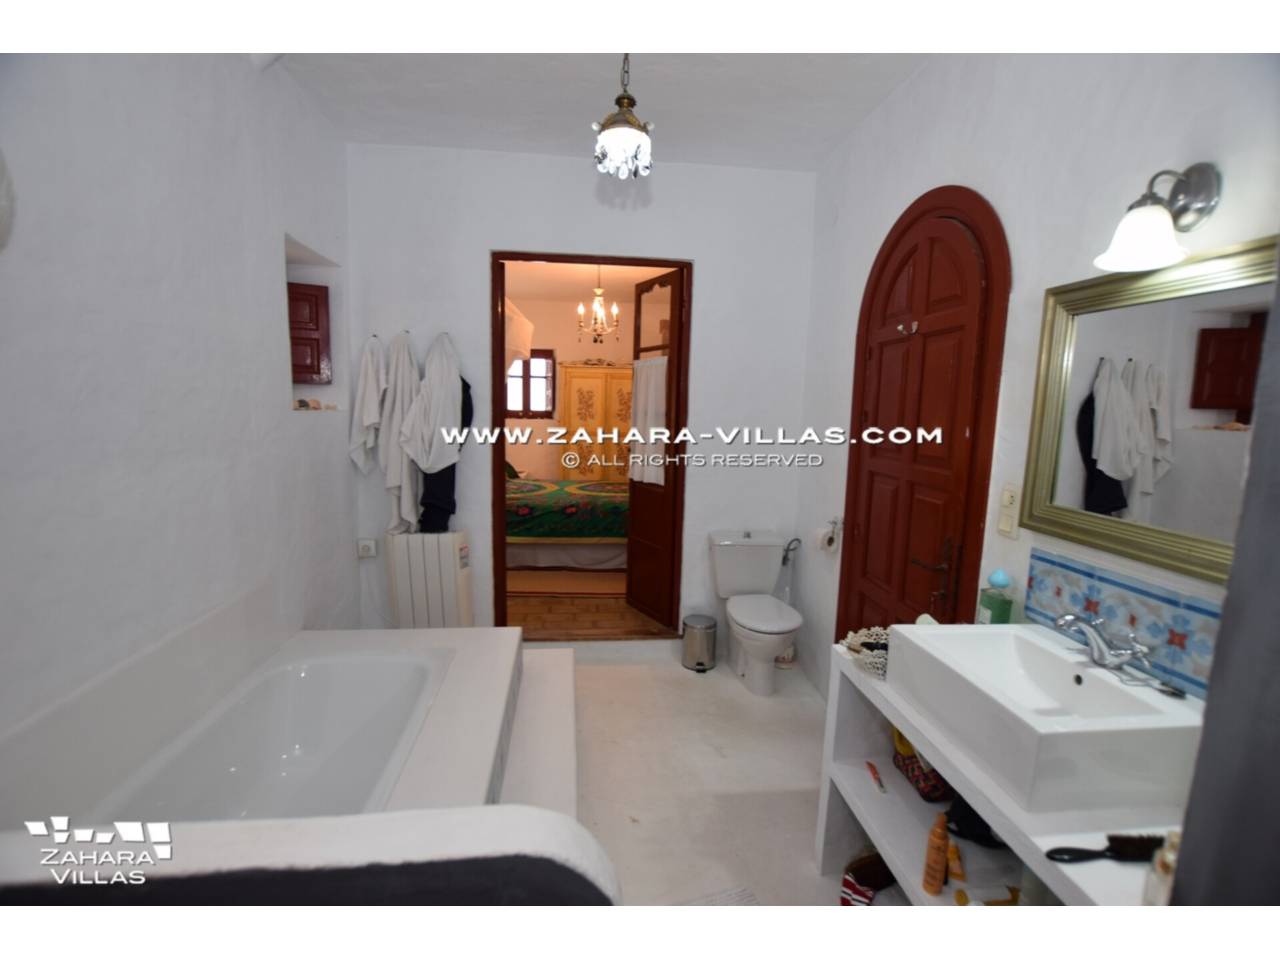 Imagen 35 de Magnificent House with central patio, in the historic center of the town